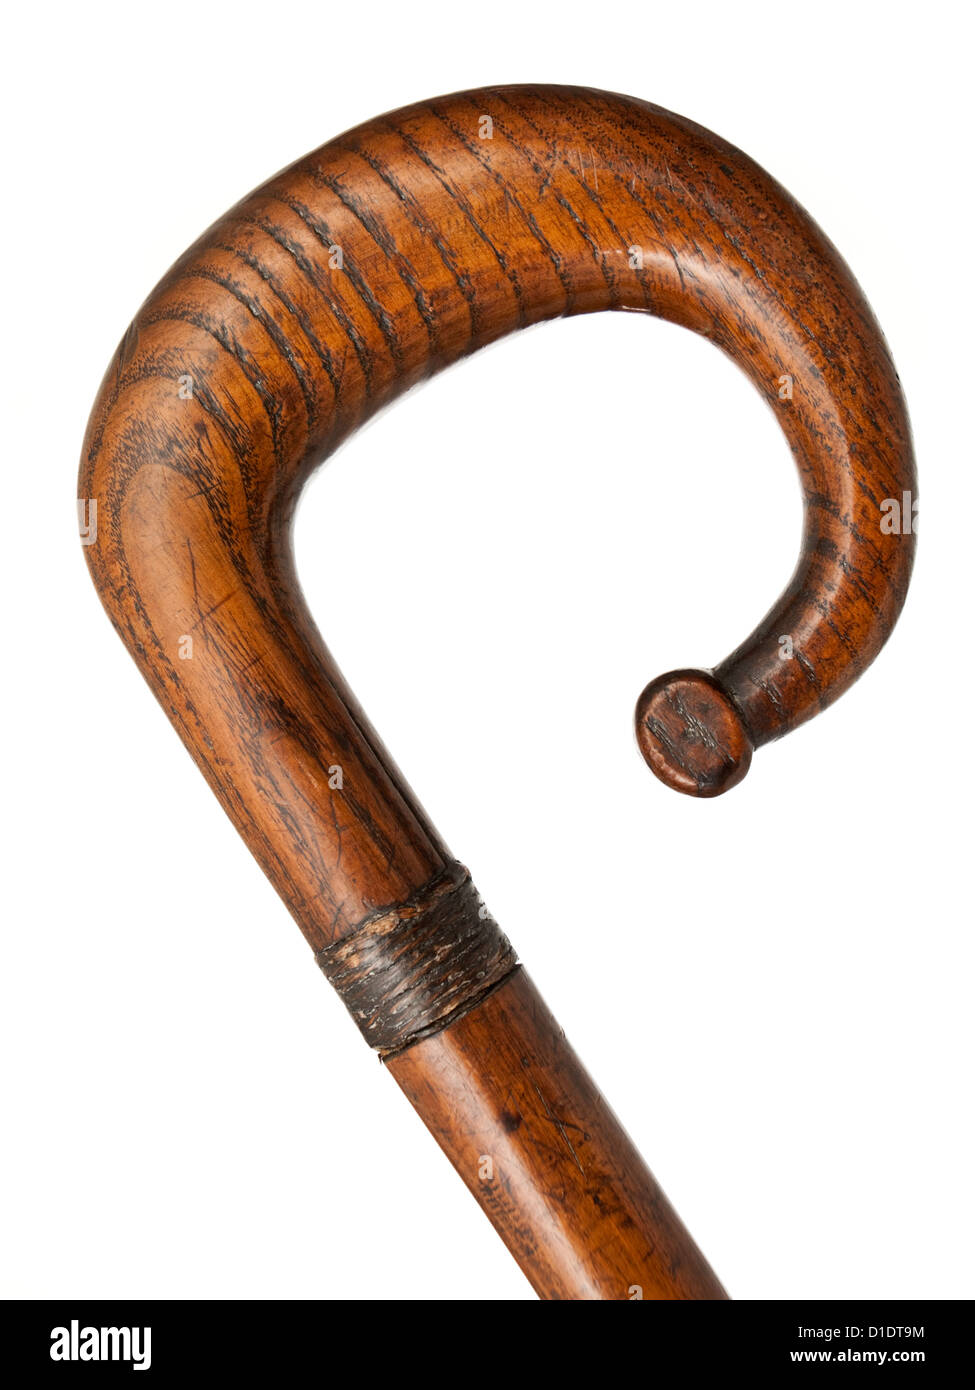 Close-up of antique wooden walking stick Stock Photo